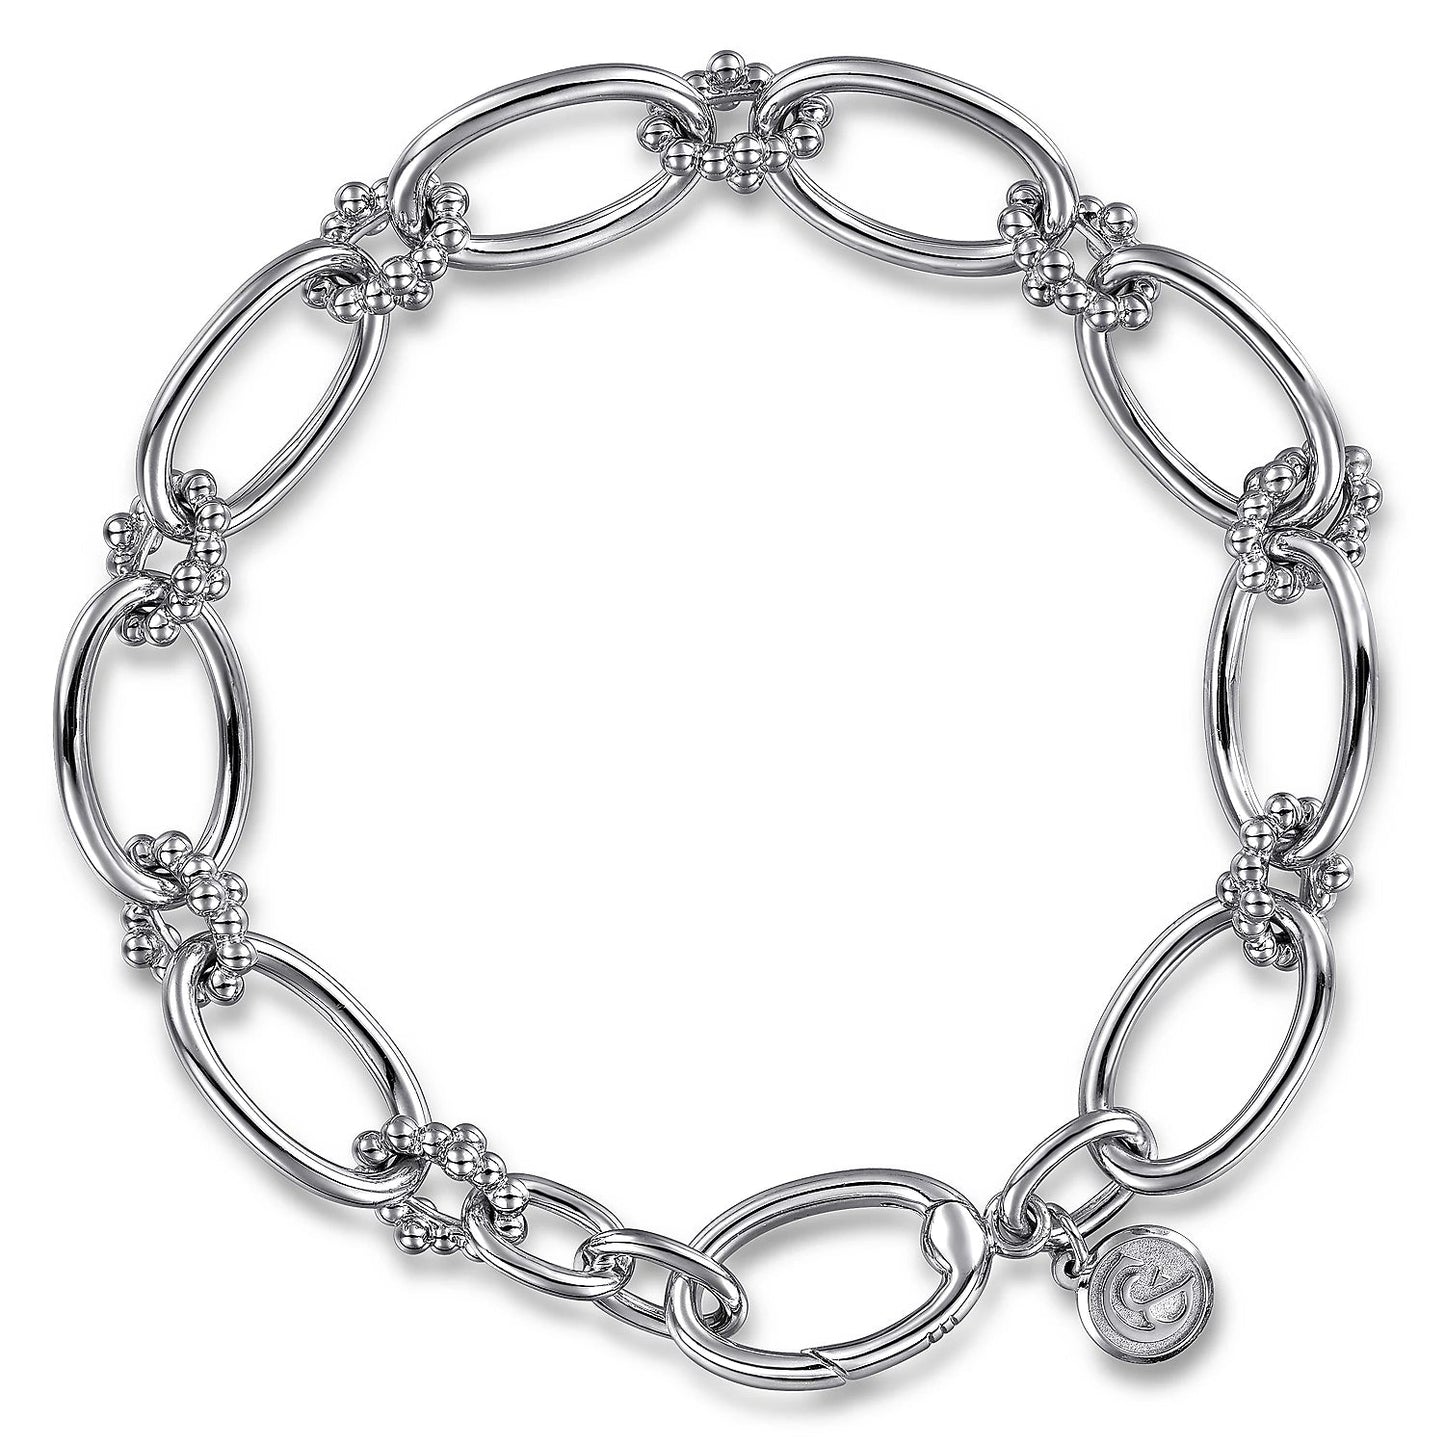 Bracelet oval link with beaded connectors - Gaines Jewelers